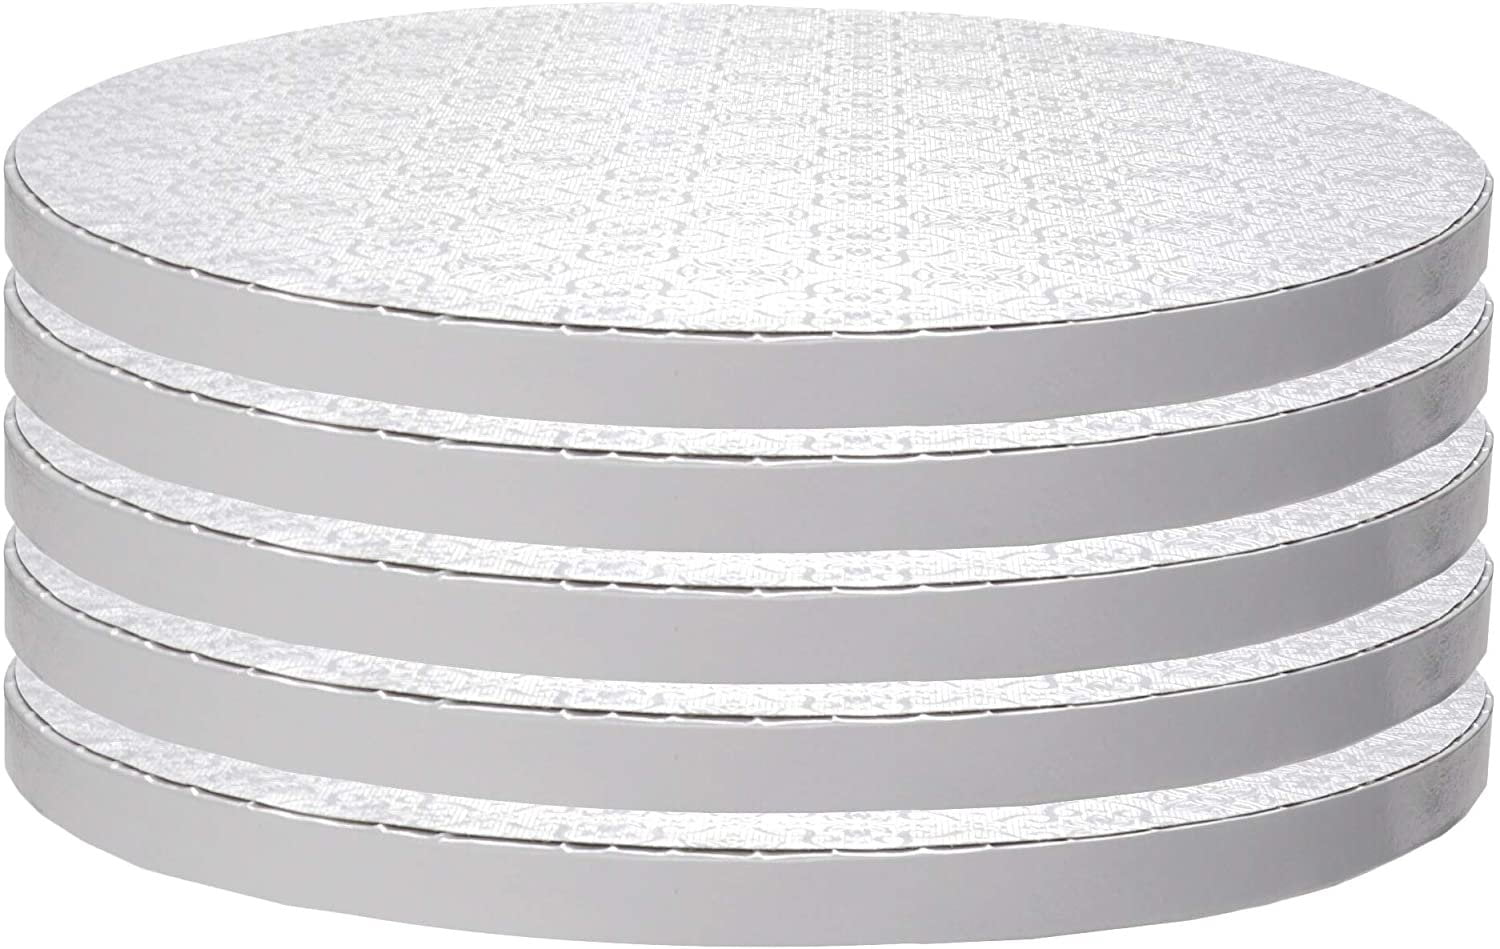 Cardboard Round 10 Inch White Cake Base Board, For Bakery